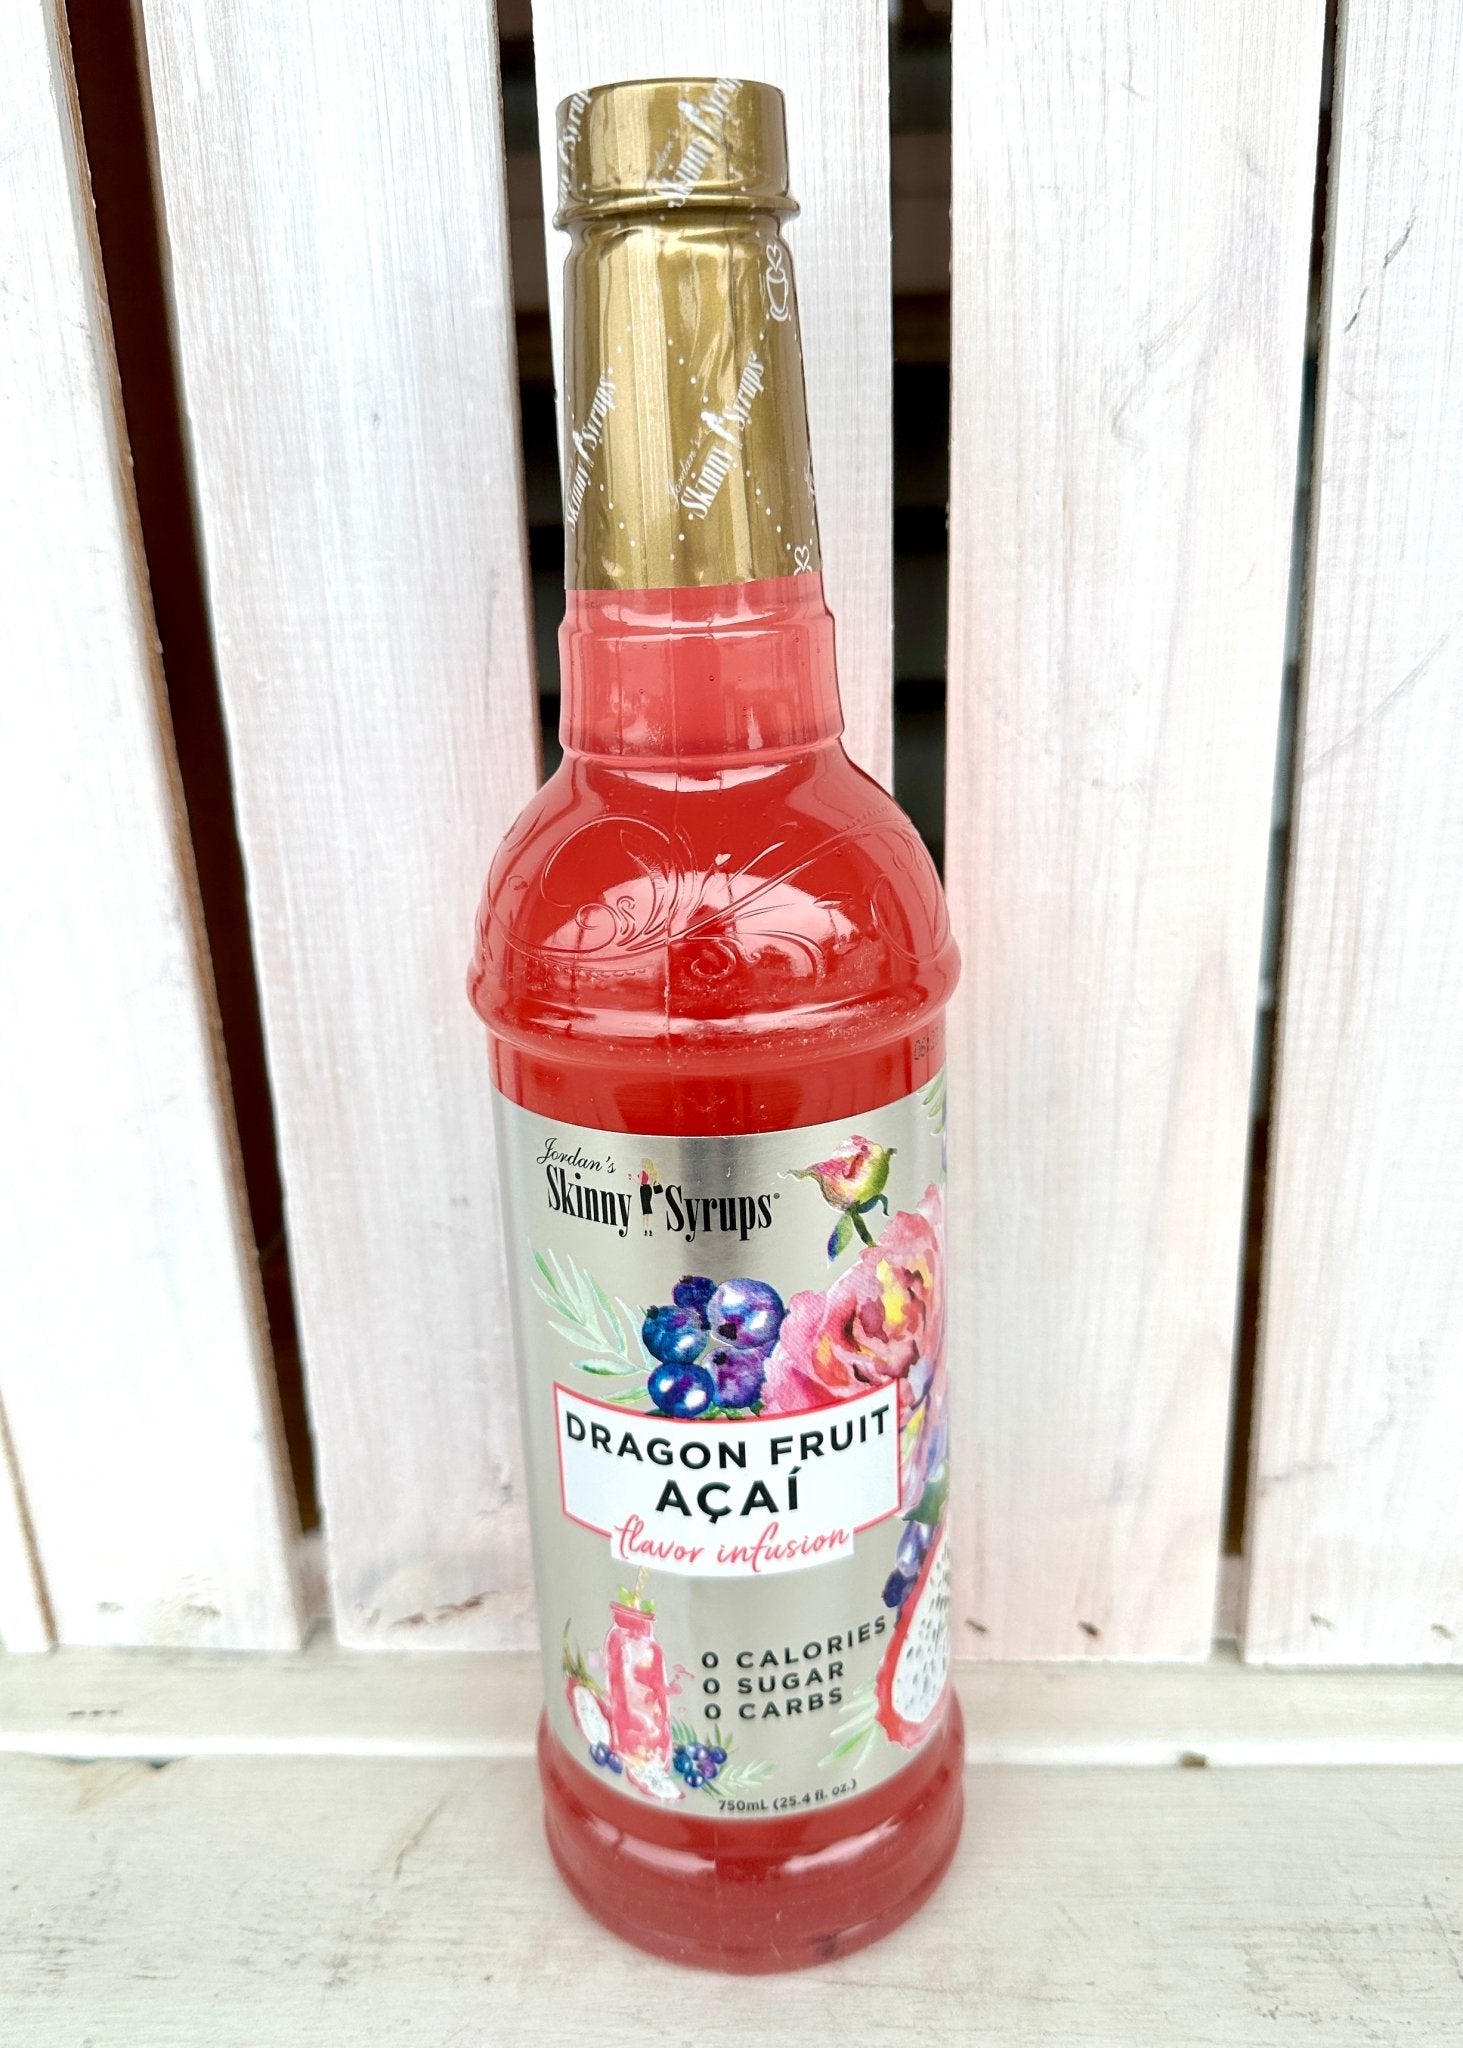 Sugar Free Dragonfruit Acai Flavor Infusion- Skinny Syrups - 25.4/750ml - Skinny Syrups - Jimberly's Boutique